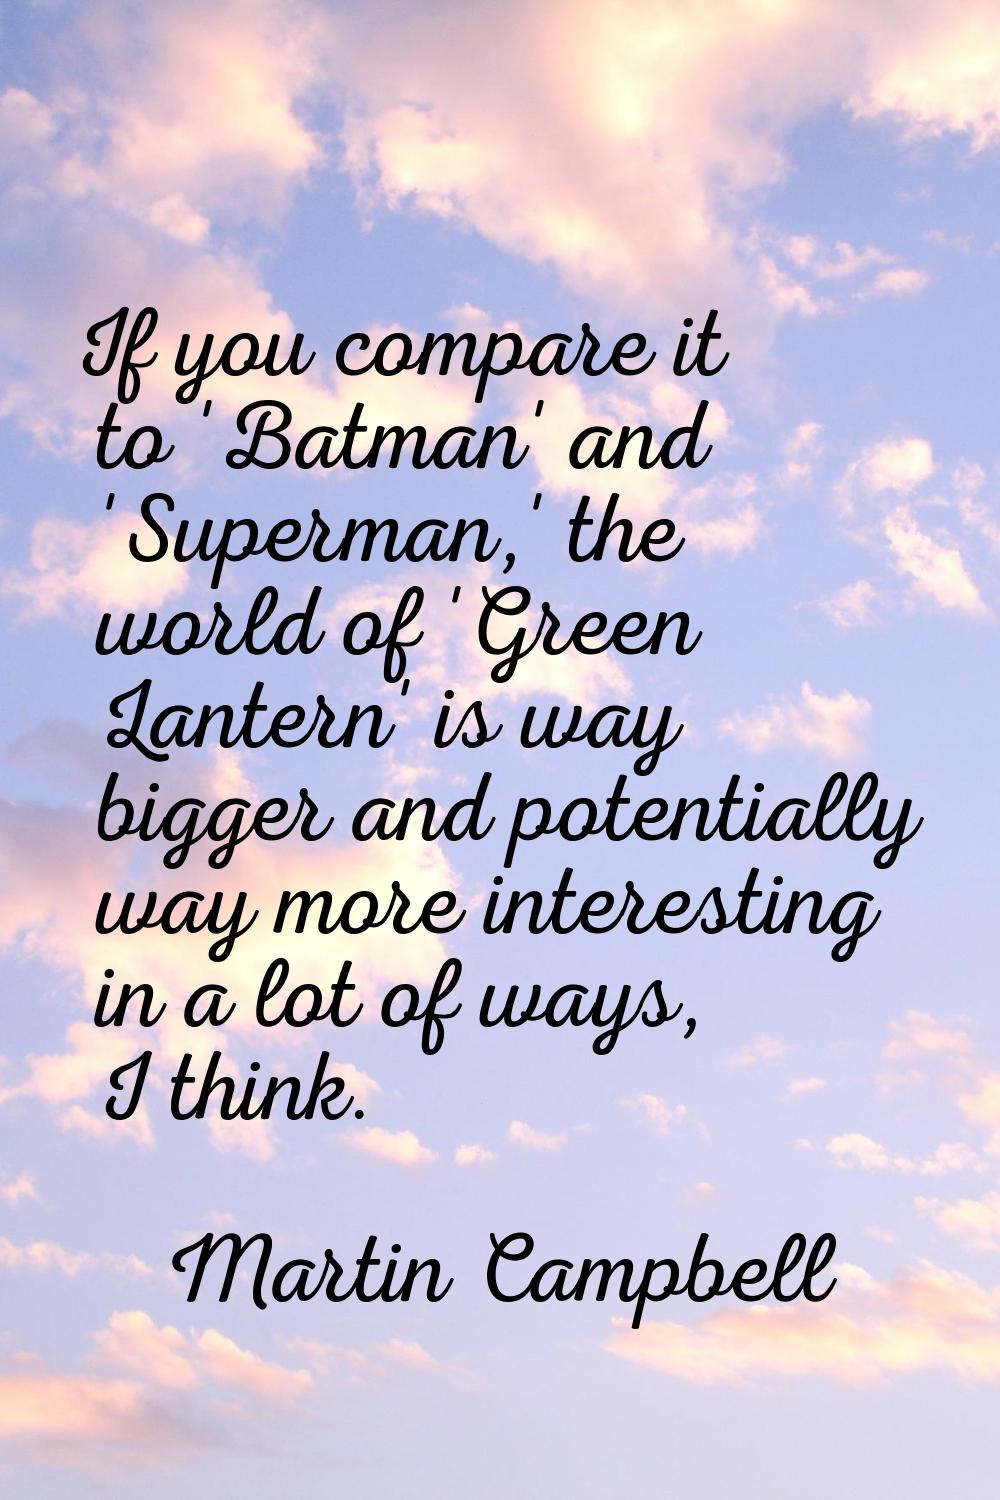 If you compare it to 'Batman' and 'Superman,' the world of 'Green Lantern' is way bigger and potent